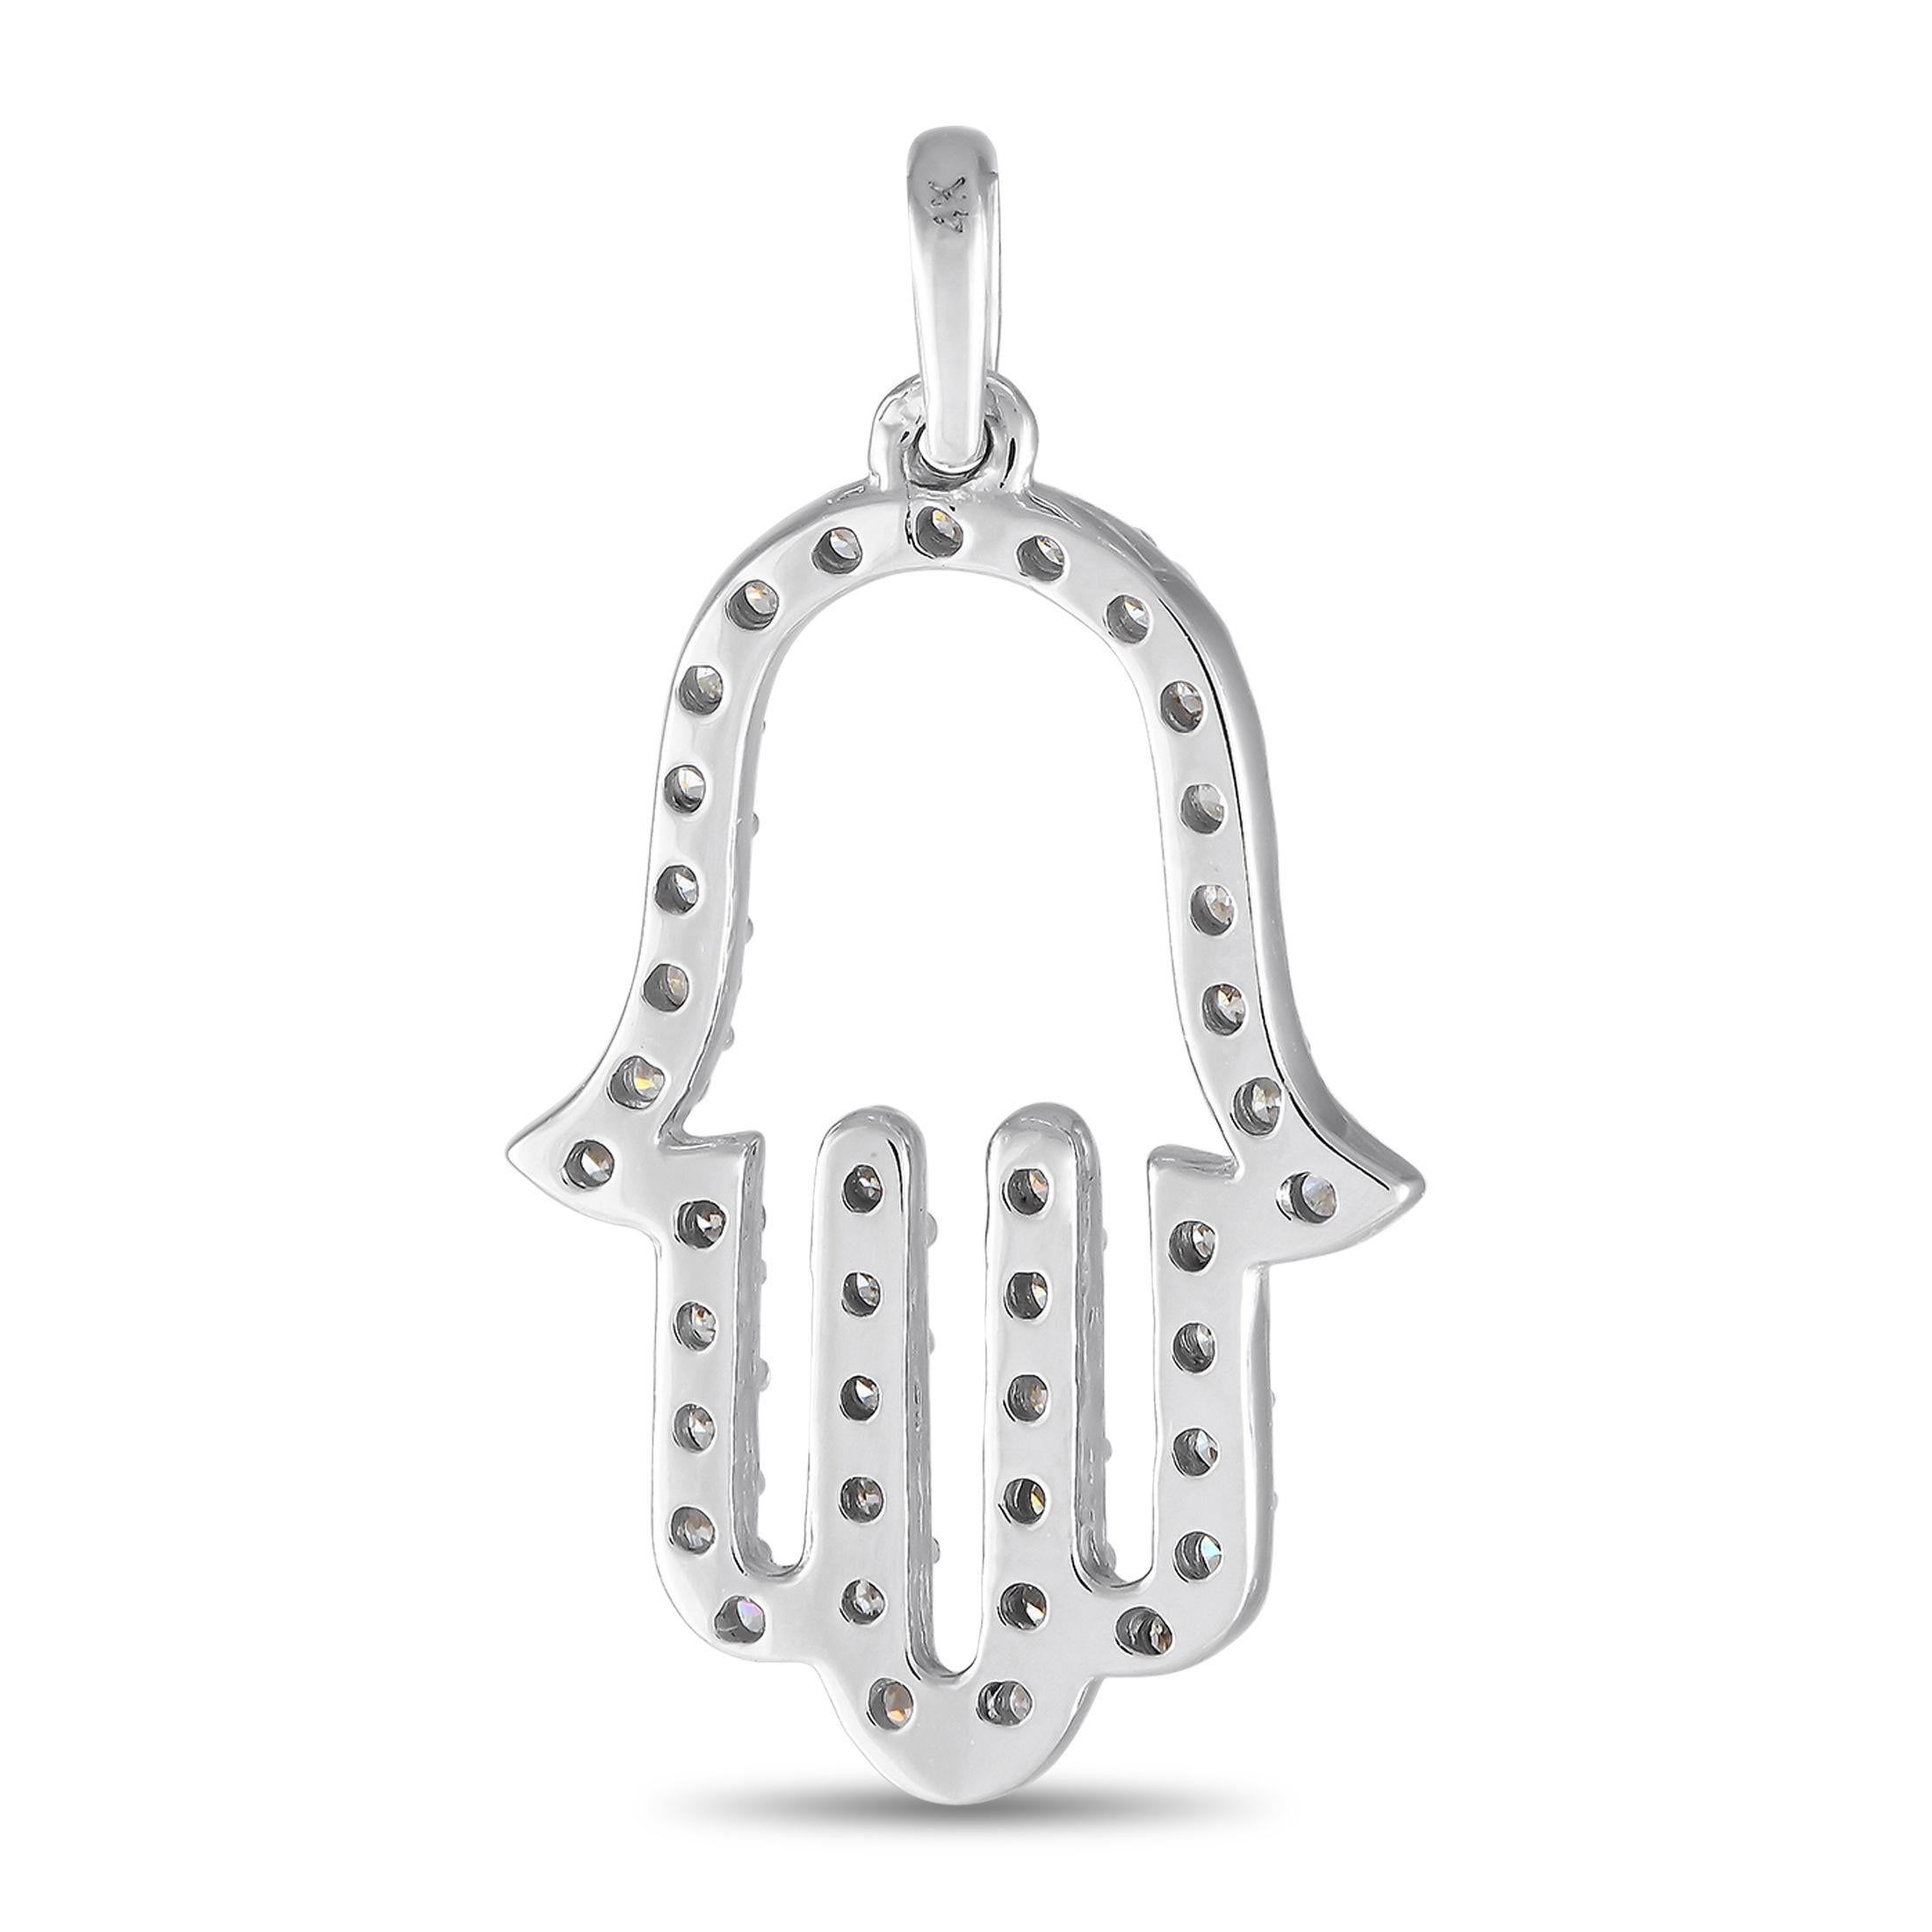 The palm-shaped Hamsa is an ancient Middle Eastern symbol of divine protection. It is said to be the hand of power, bringing its owner good luck, prosperity, and happiness. Include this glittering Hamsa hand pendant in your jewelry collection and